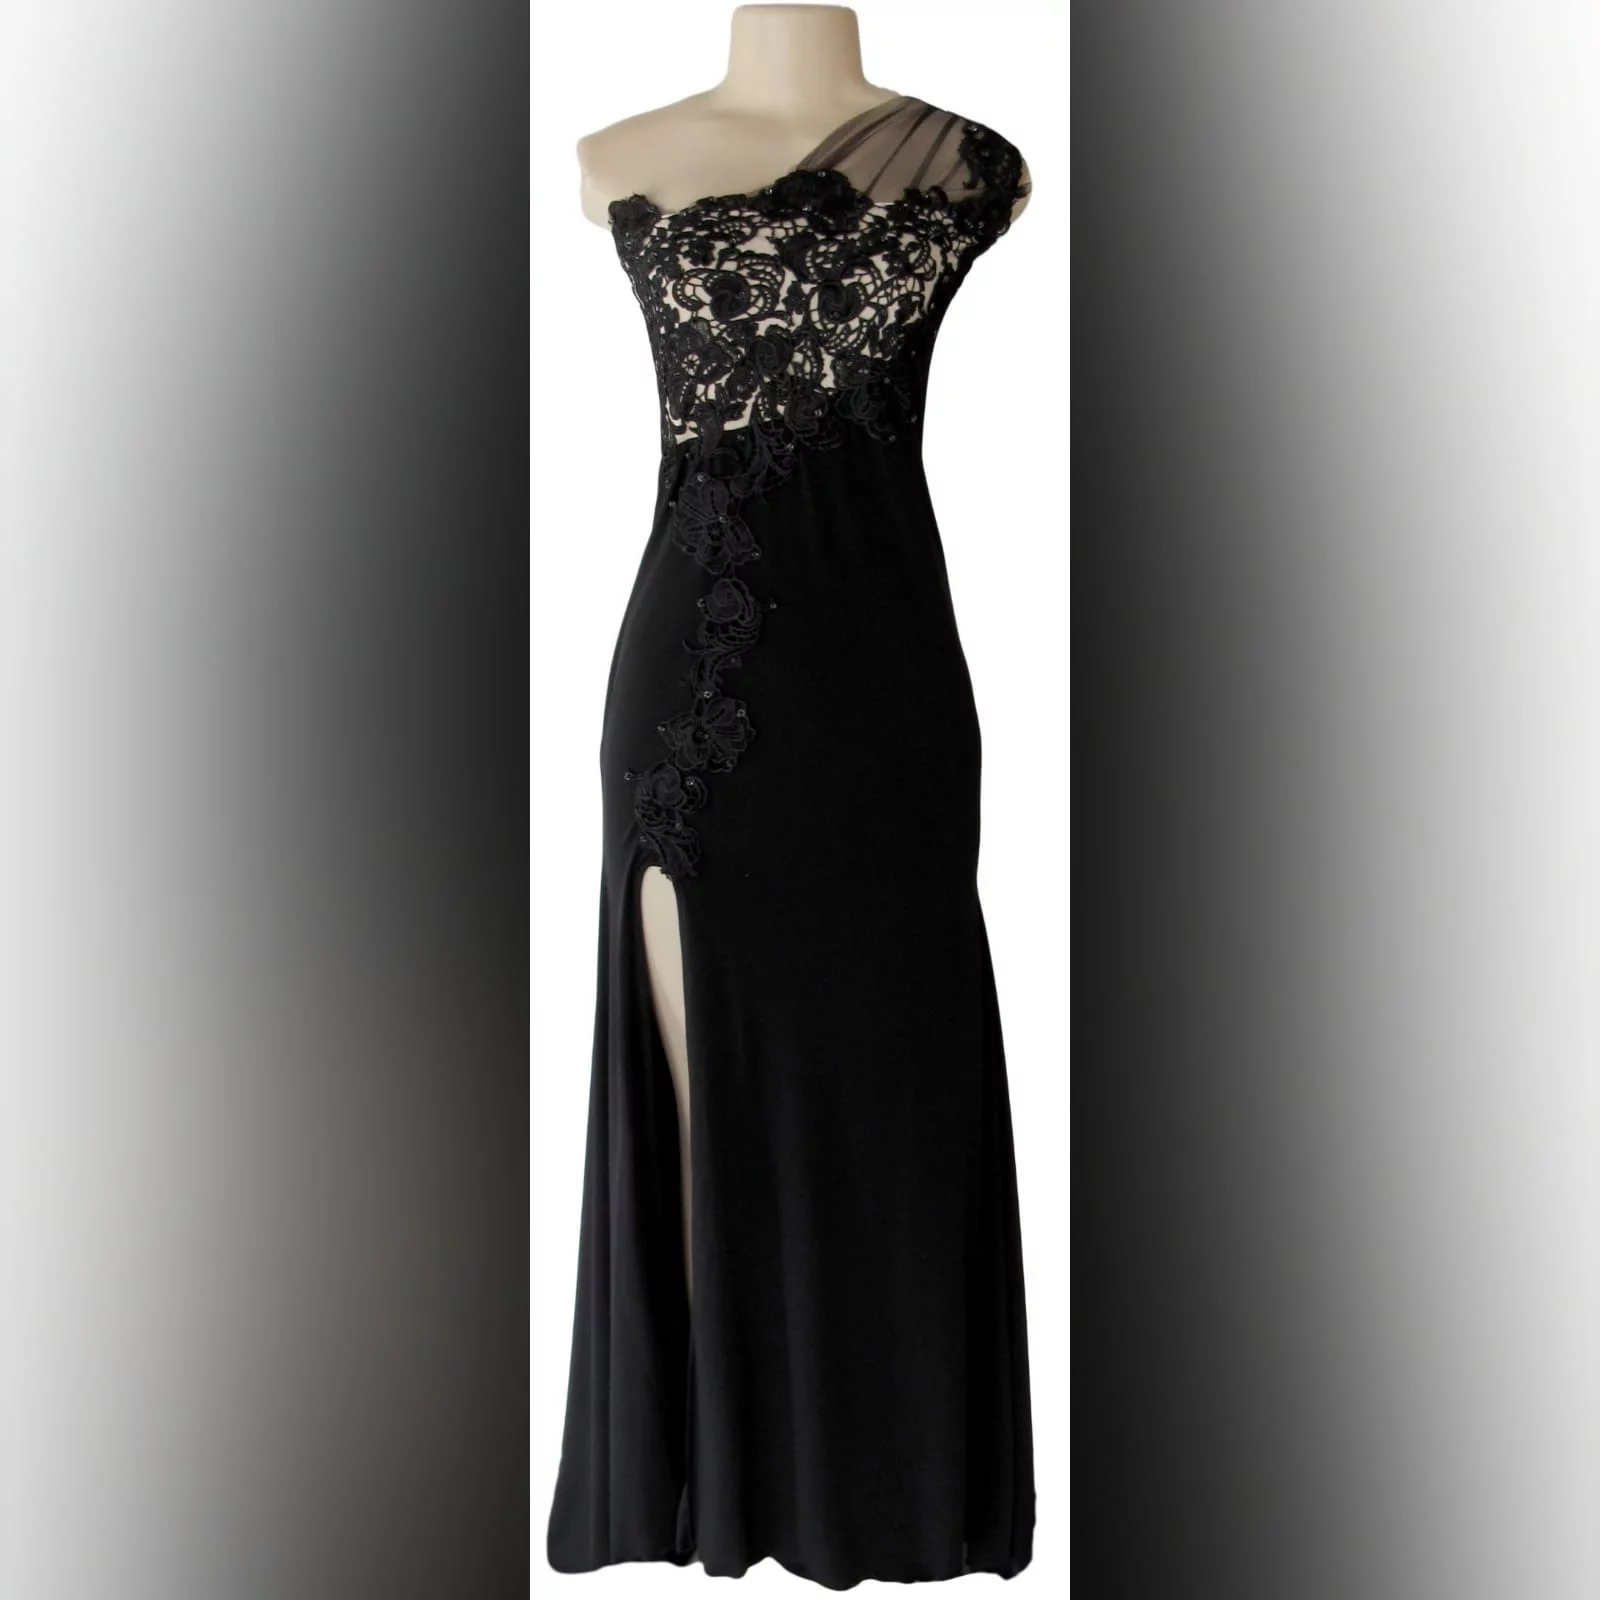 Long black evening dress with lace 1 single shoulder, lace bodice long black evening dress. With a slit and a train